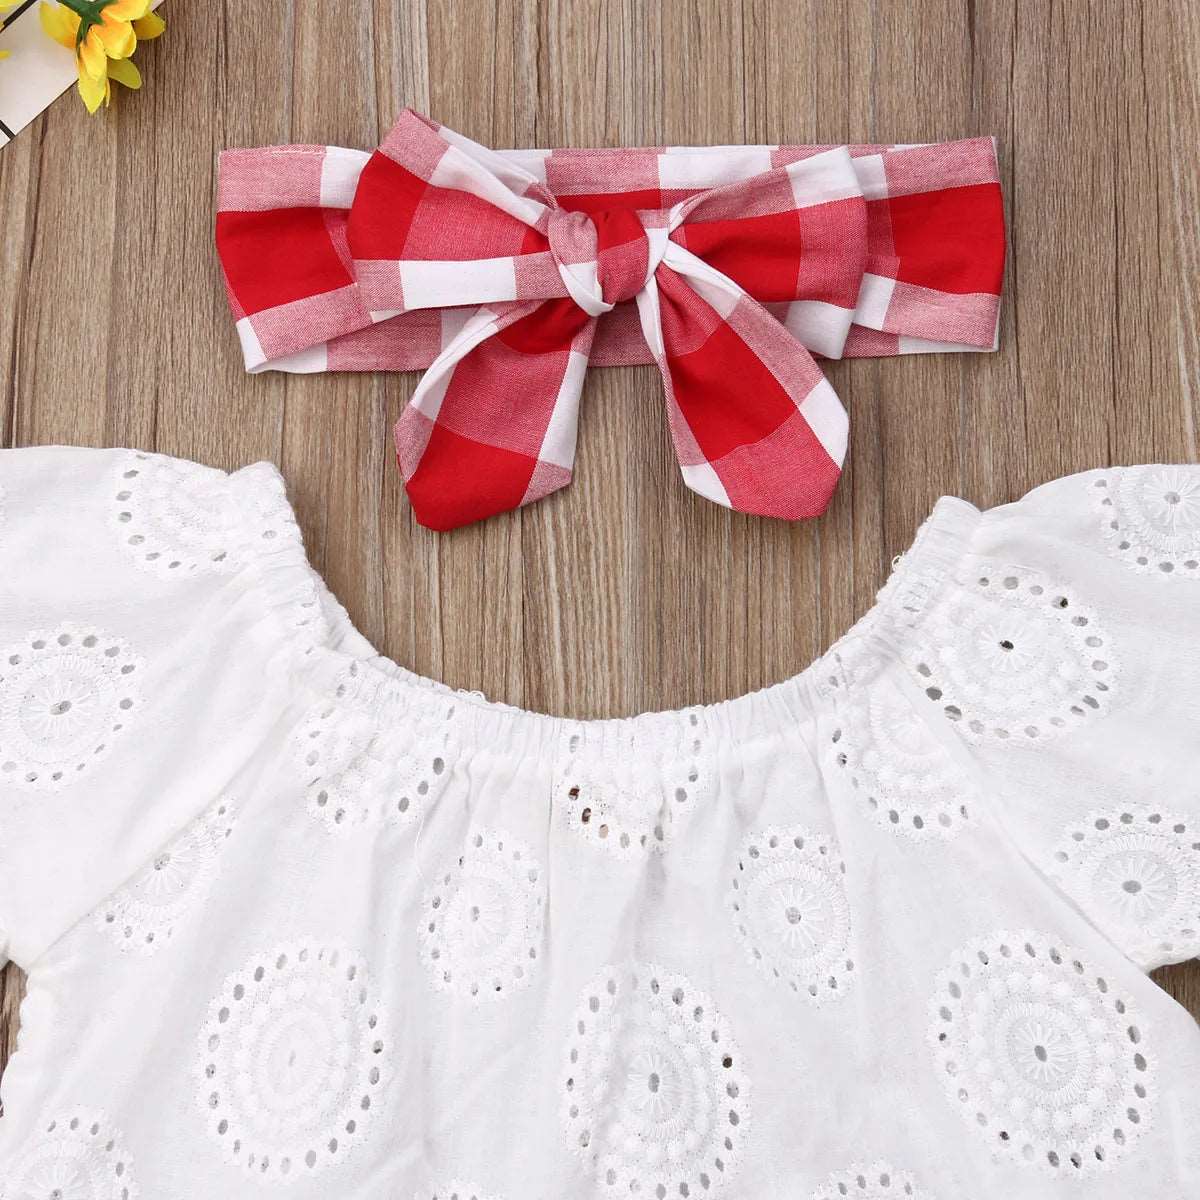 Adorable Baby Dress Set: Off Shoulder Lace Tops & Red Plaid Shorts